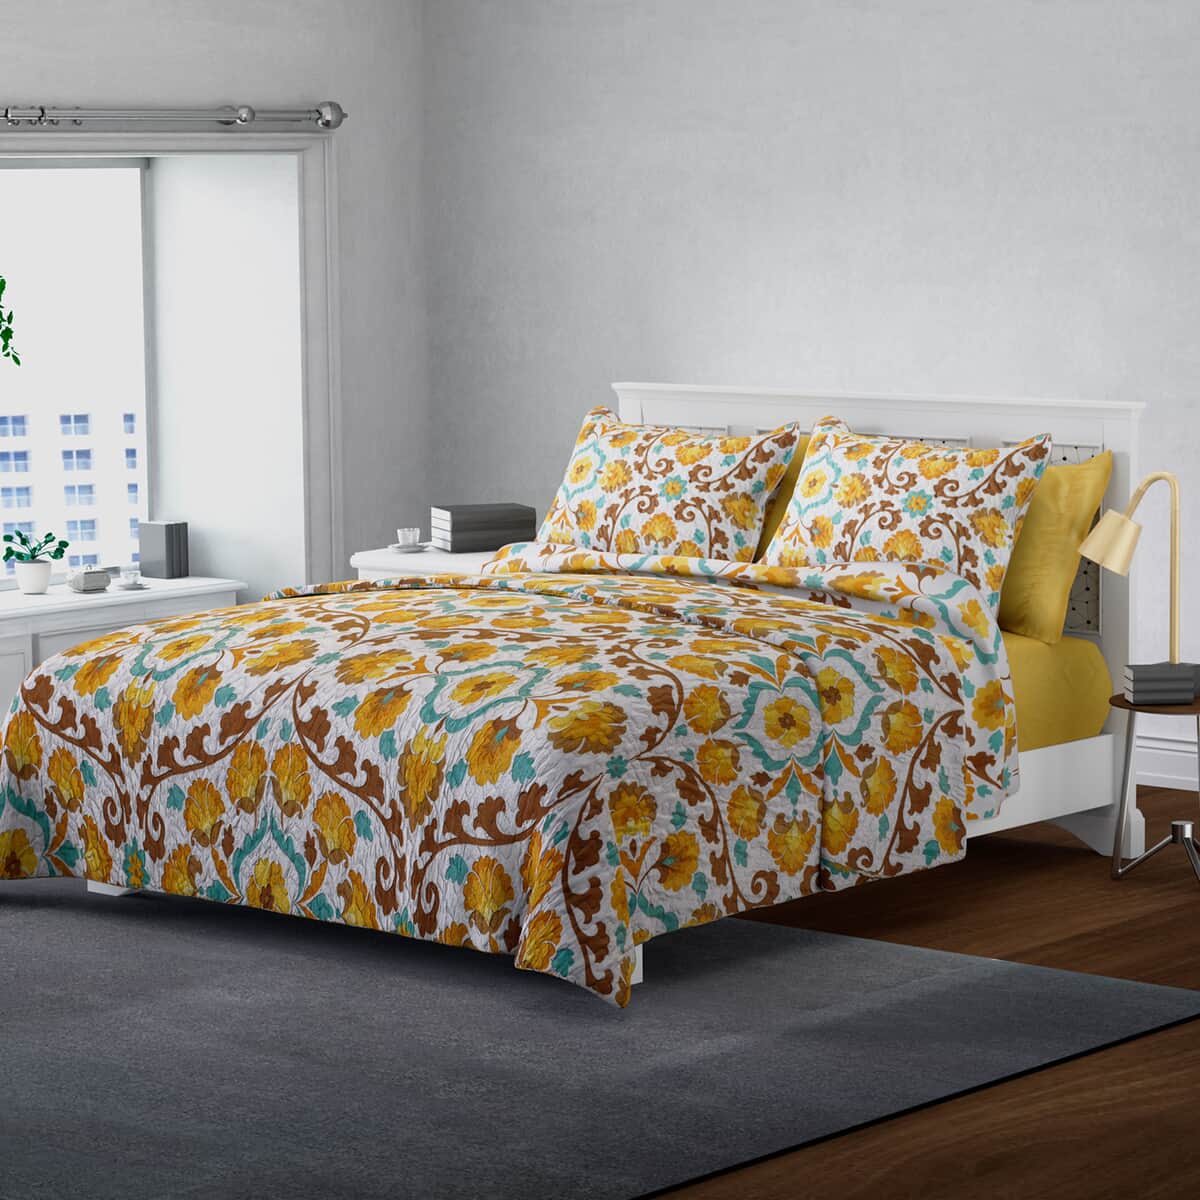 Homesmart Yellow Floral Print 7pc Quilt and Sheet Set - Queen (100% Microfiber) image number 0